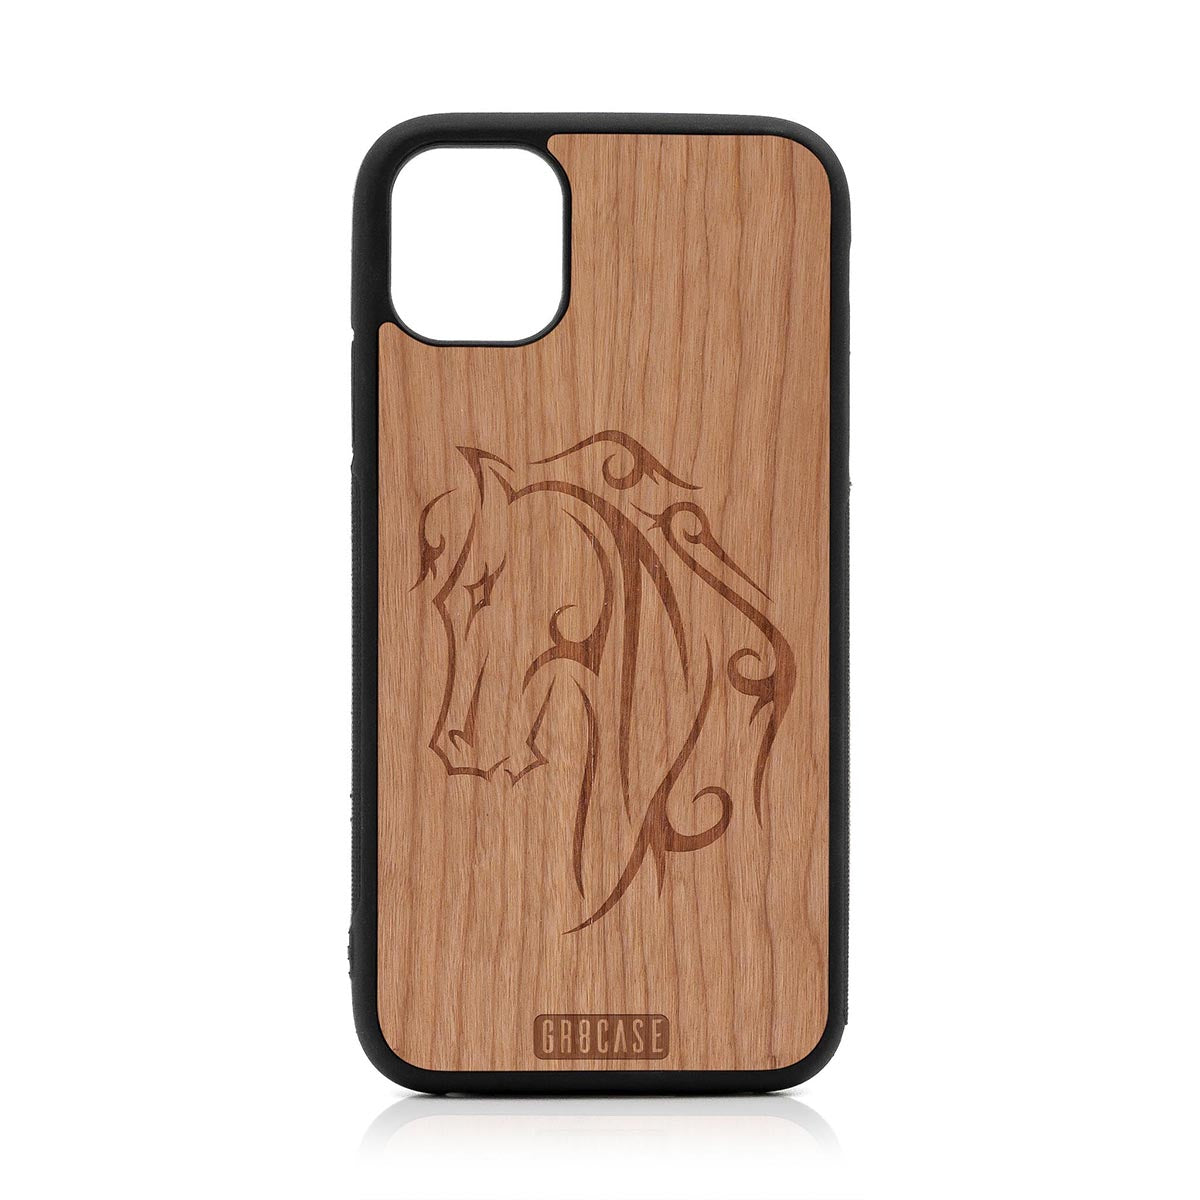 Horse Tattoo Design Wood Case For iPhone 11 by GR8CASE